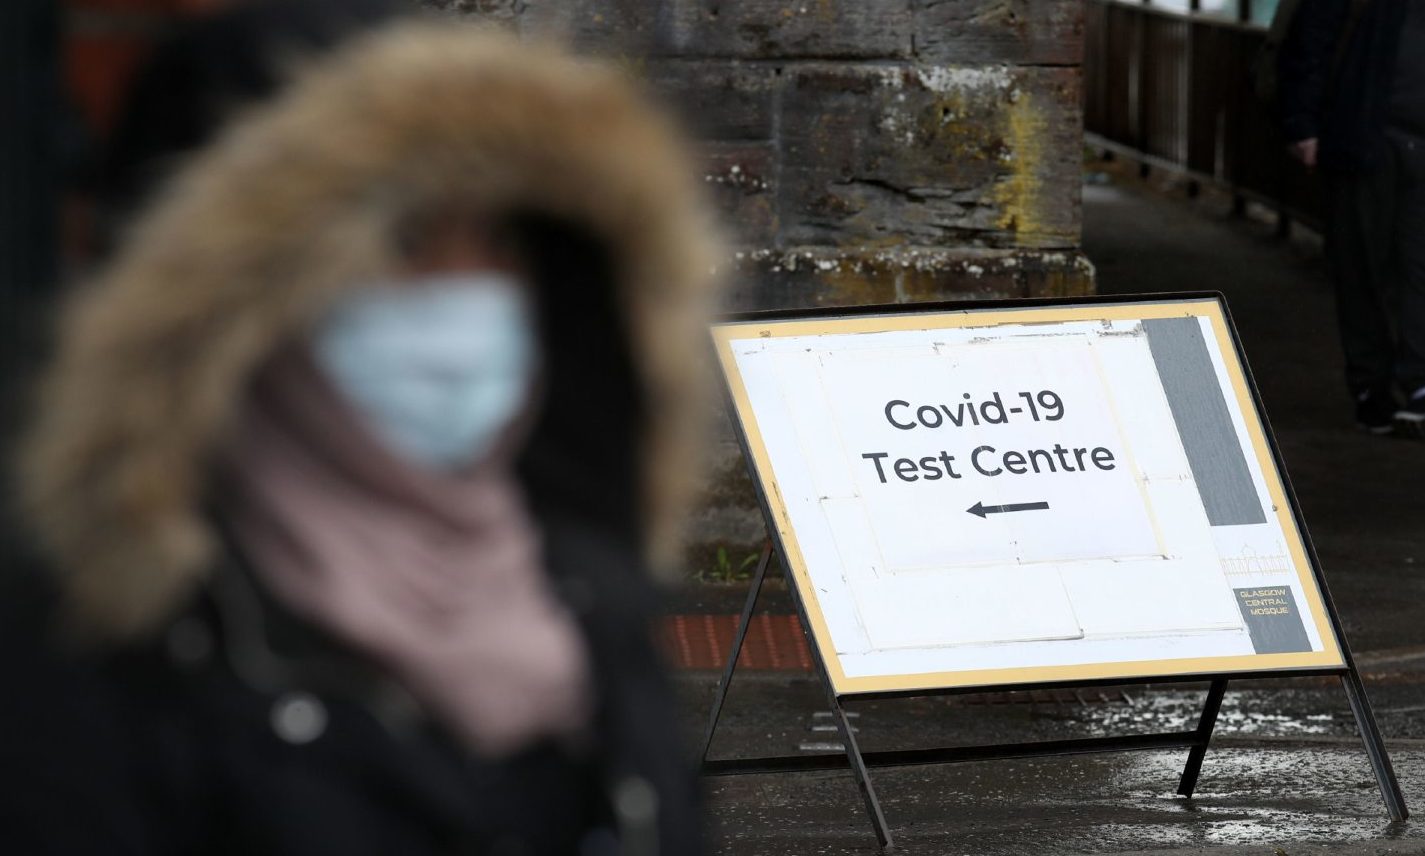 A person wearing a mask walking next to a Covid-19 Test Centre sign